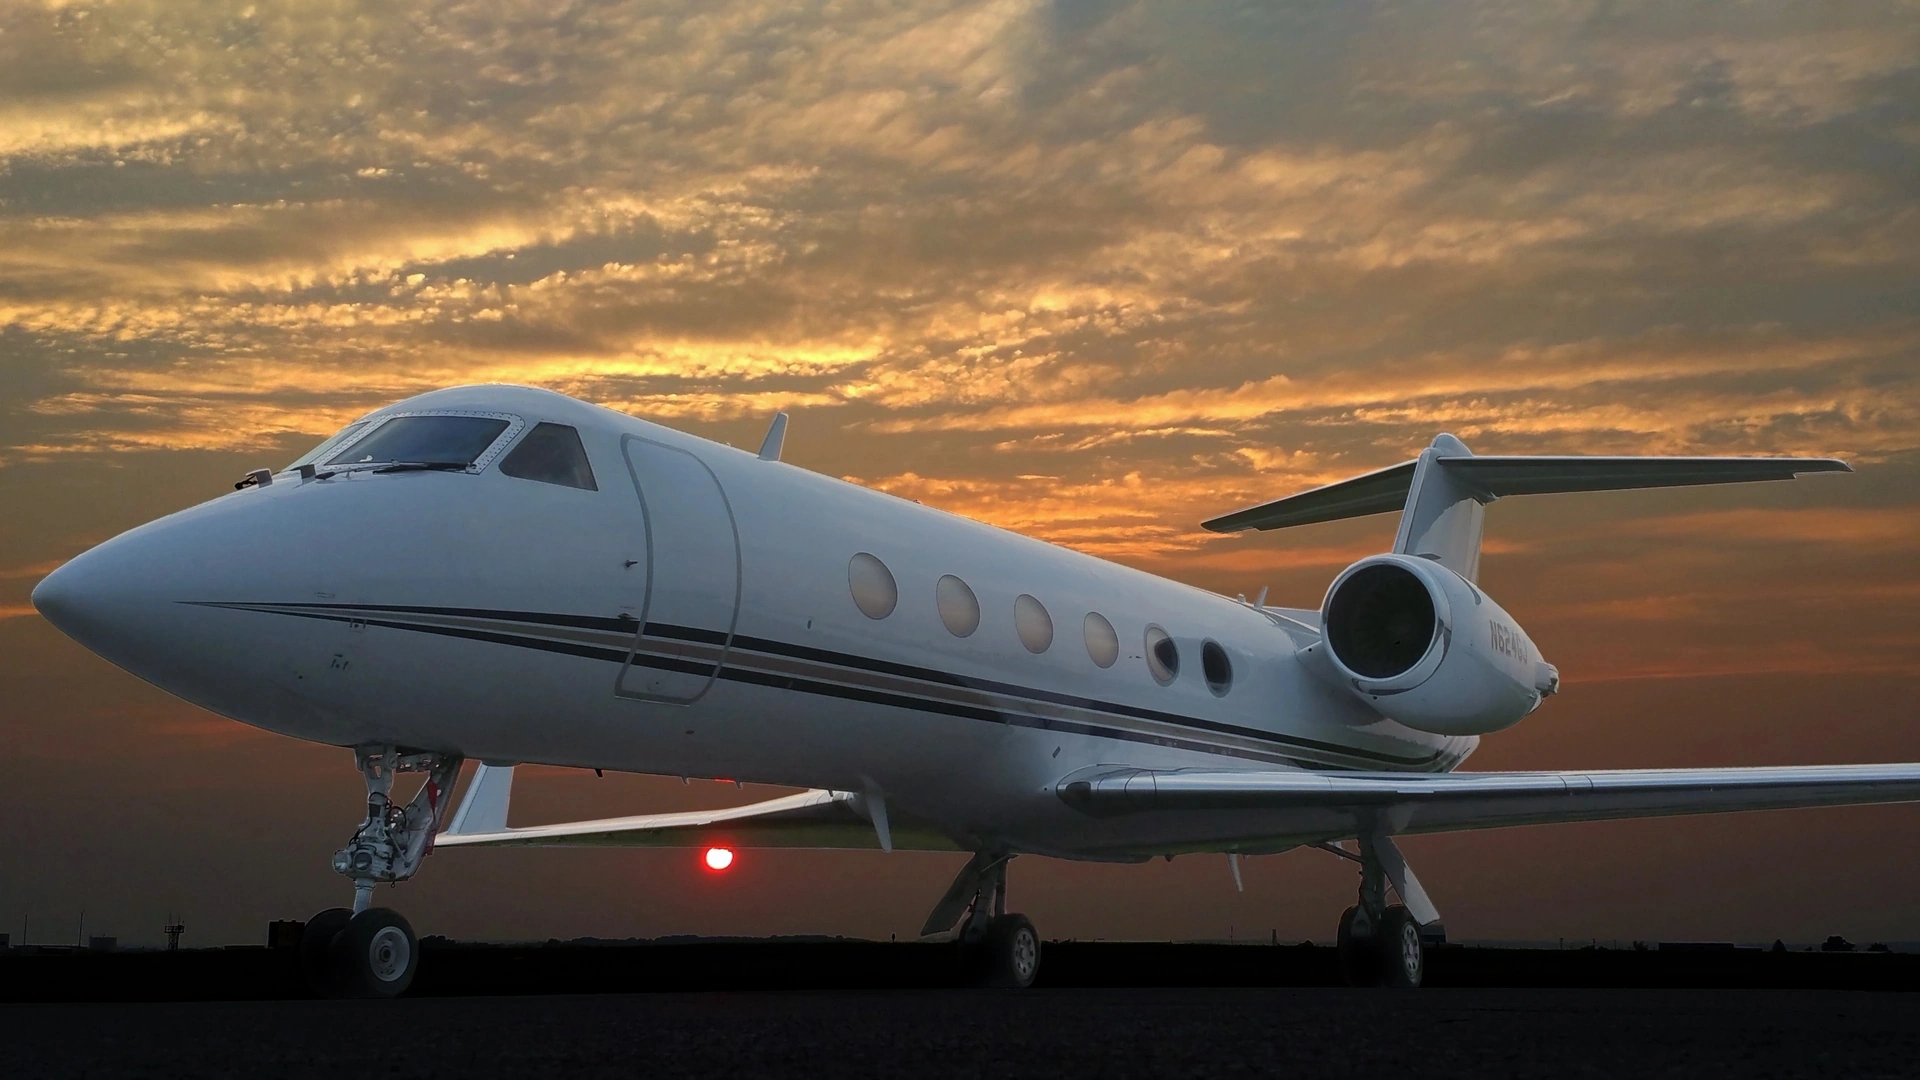 Alerion Gulfstream IVSP - N624GJ available for private charter by Alerion Aviation.